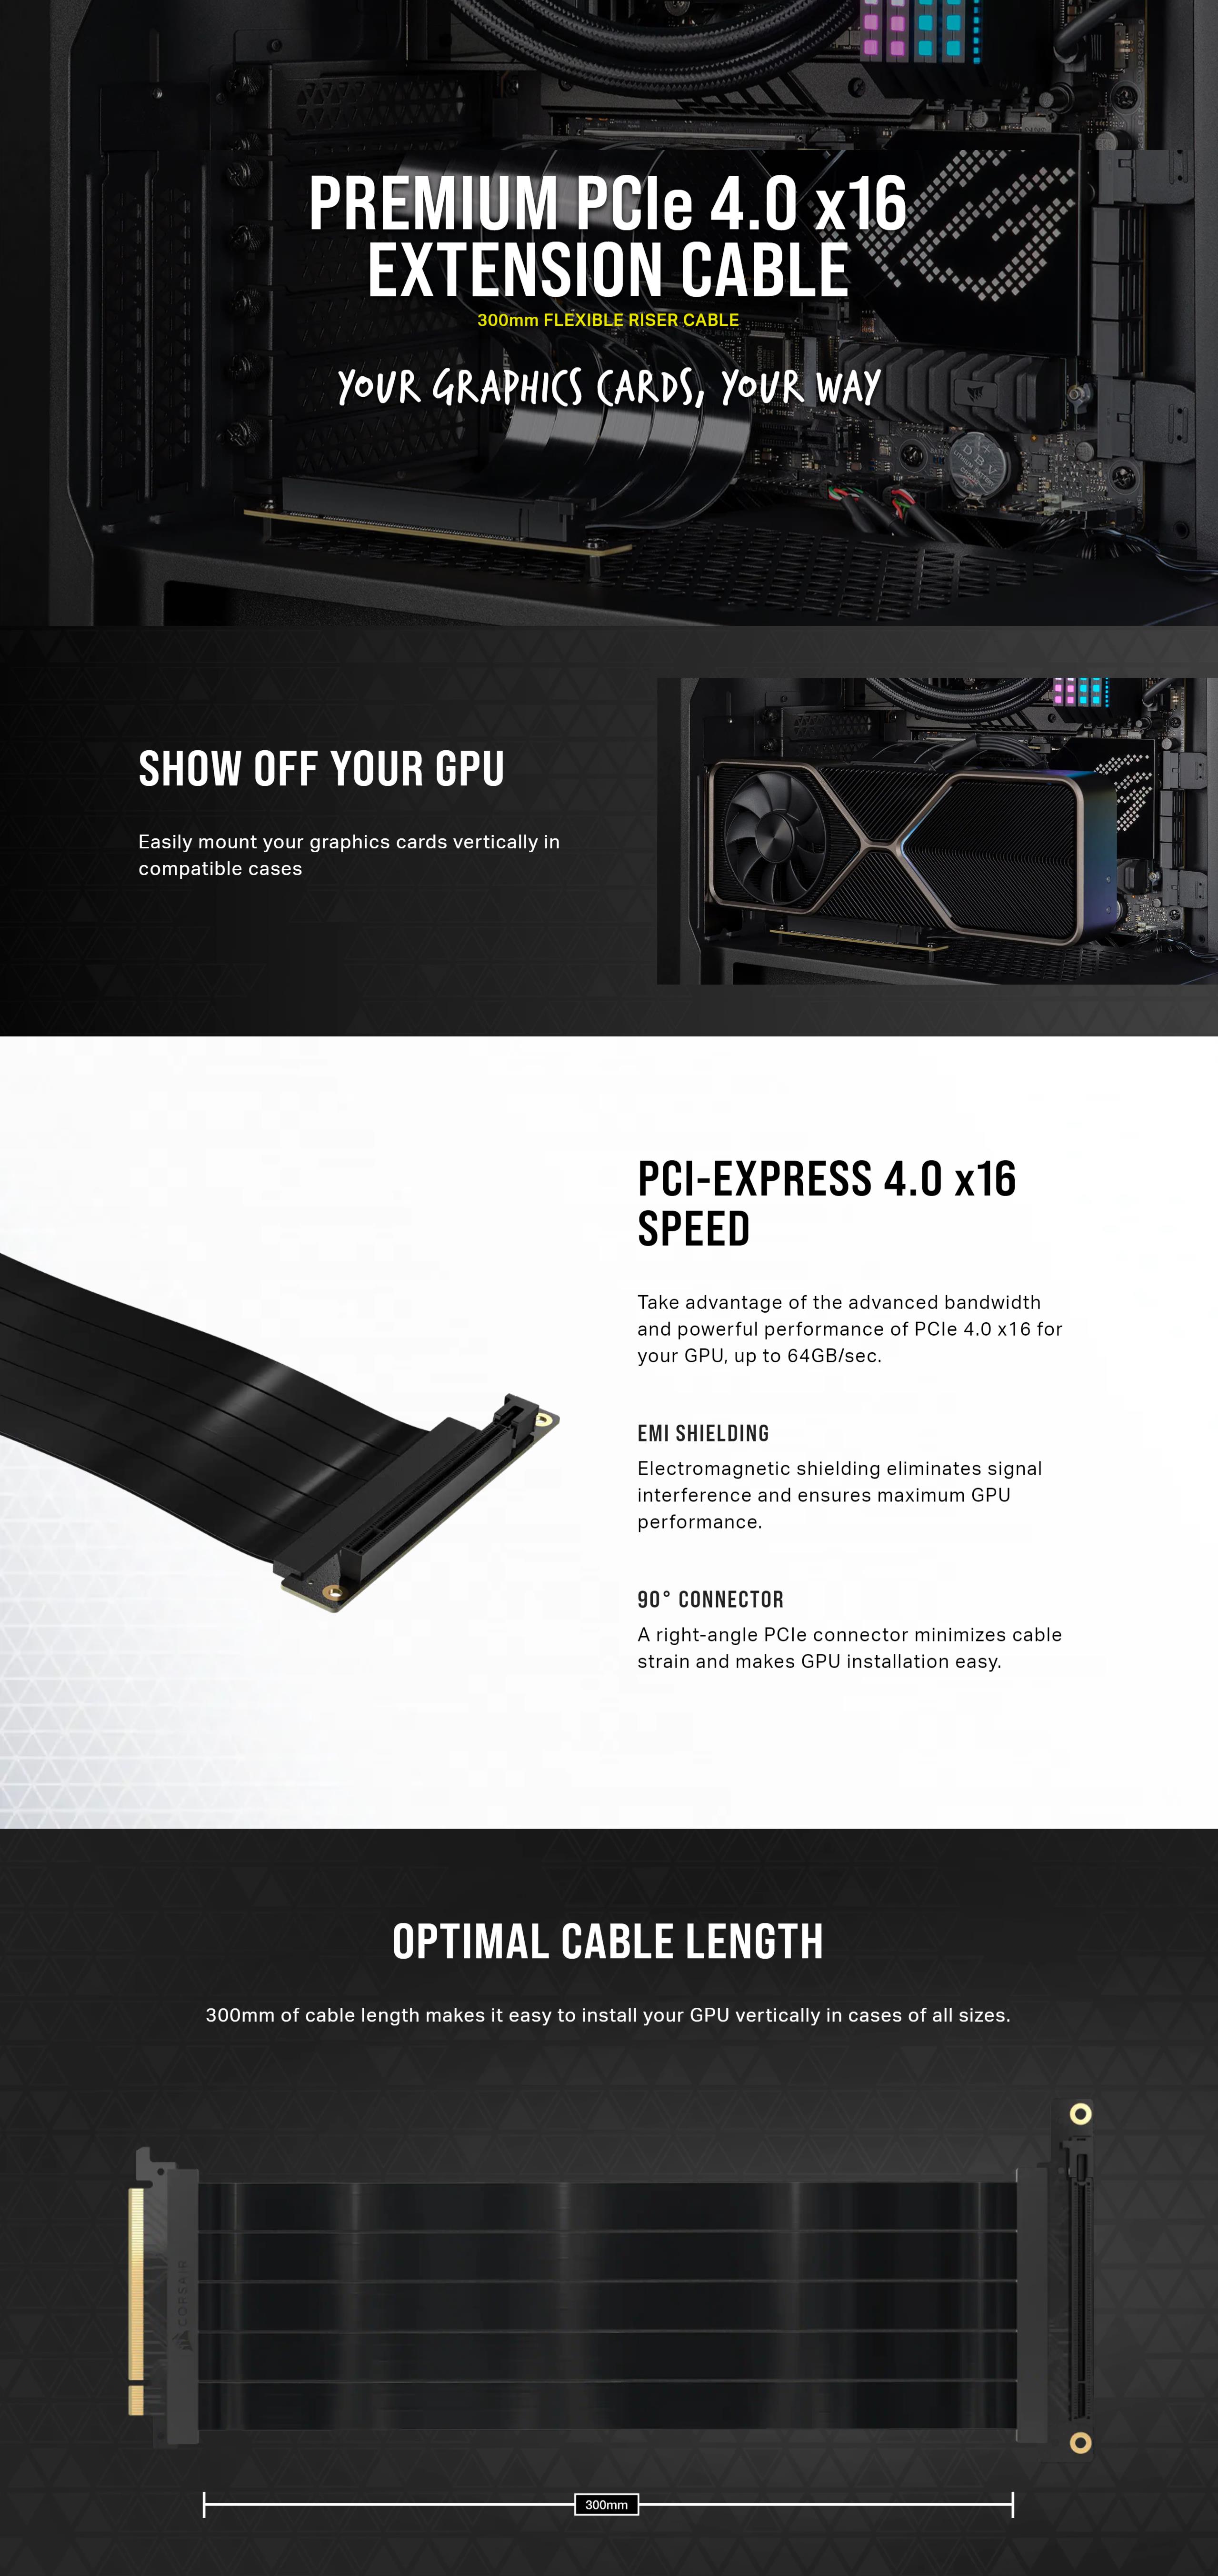 A large marketing image providing additional information about the product Corsair Premium 300mm PCIe 4.0 x16 Extension Cable - Additional alt info not provided